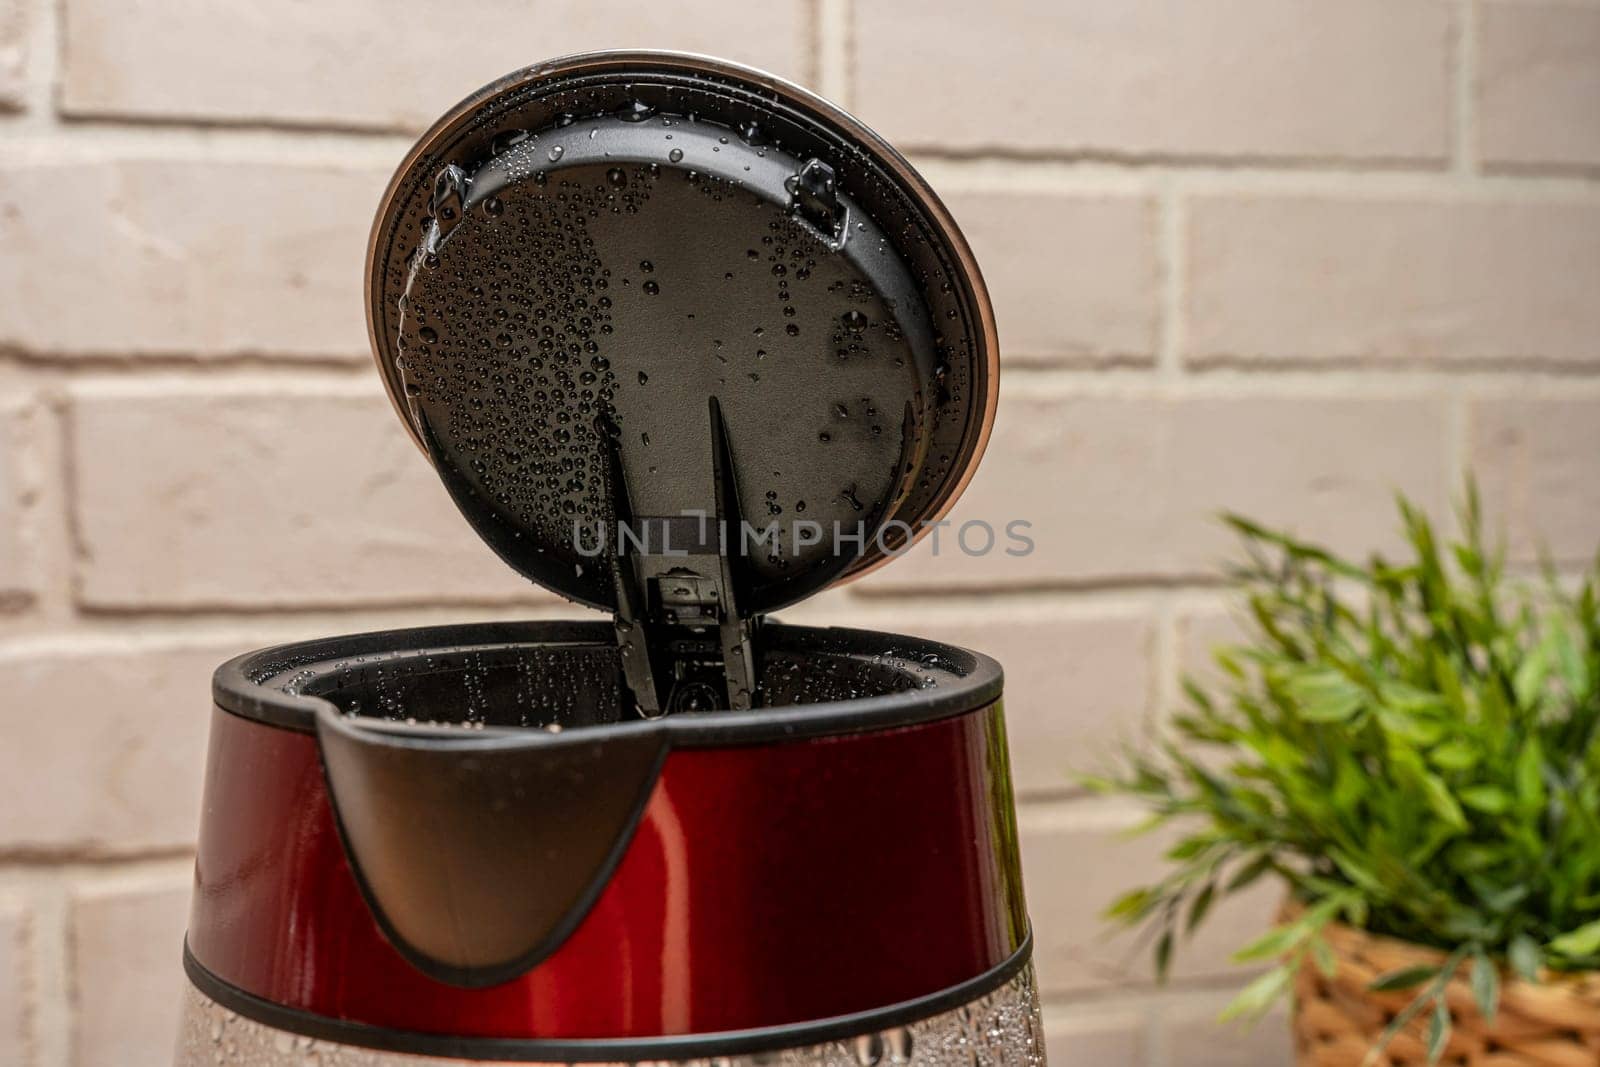 a new modern electric kettle with an open lid and drops of condensate on it, with boiling water against a light brick wall. close-up